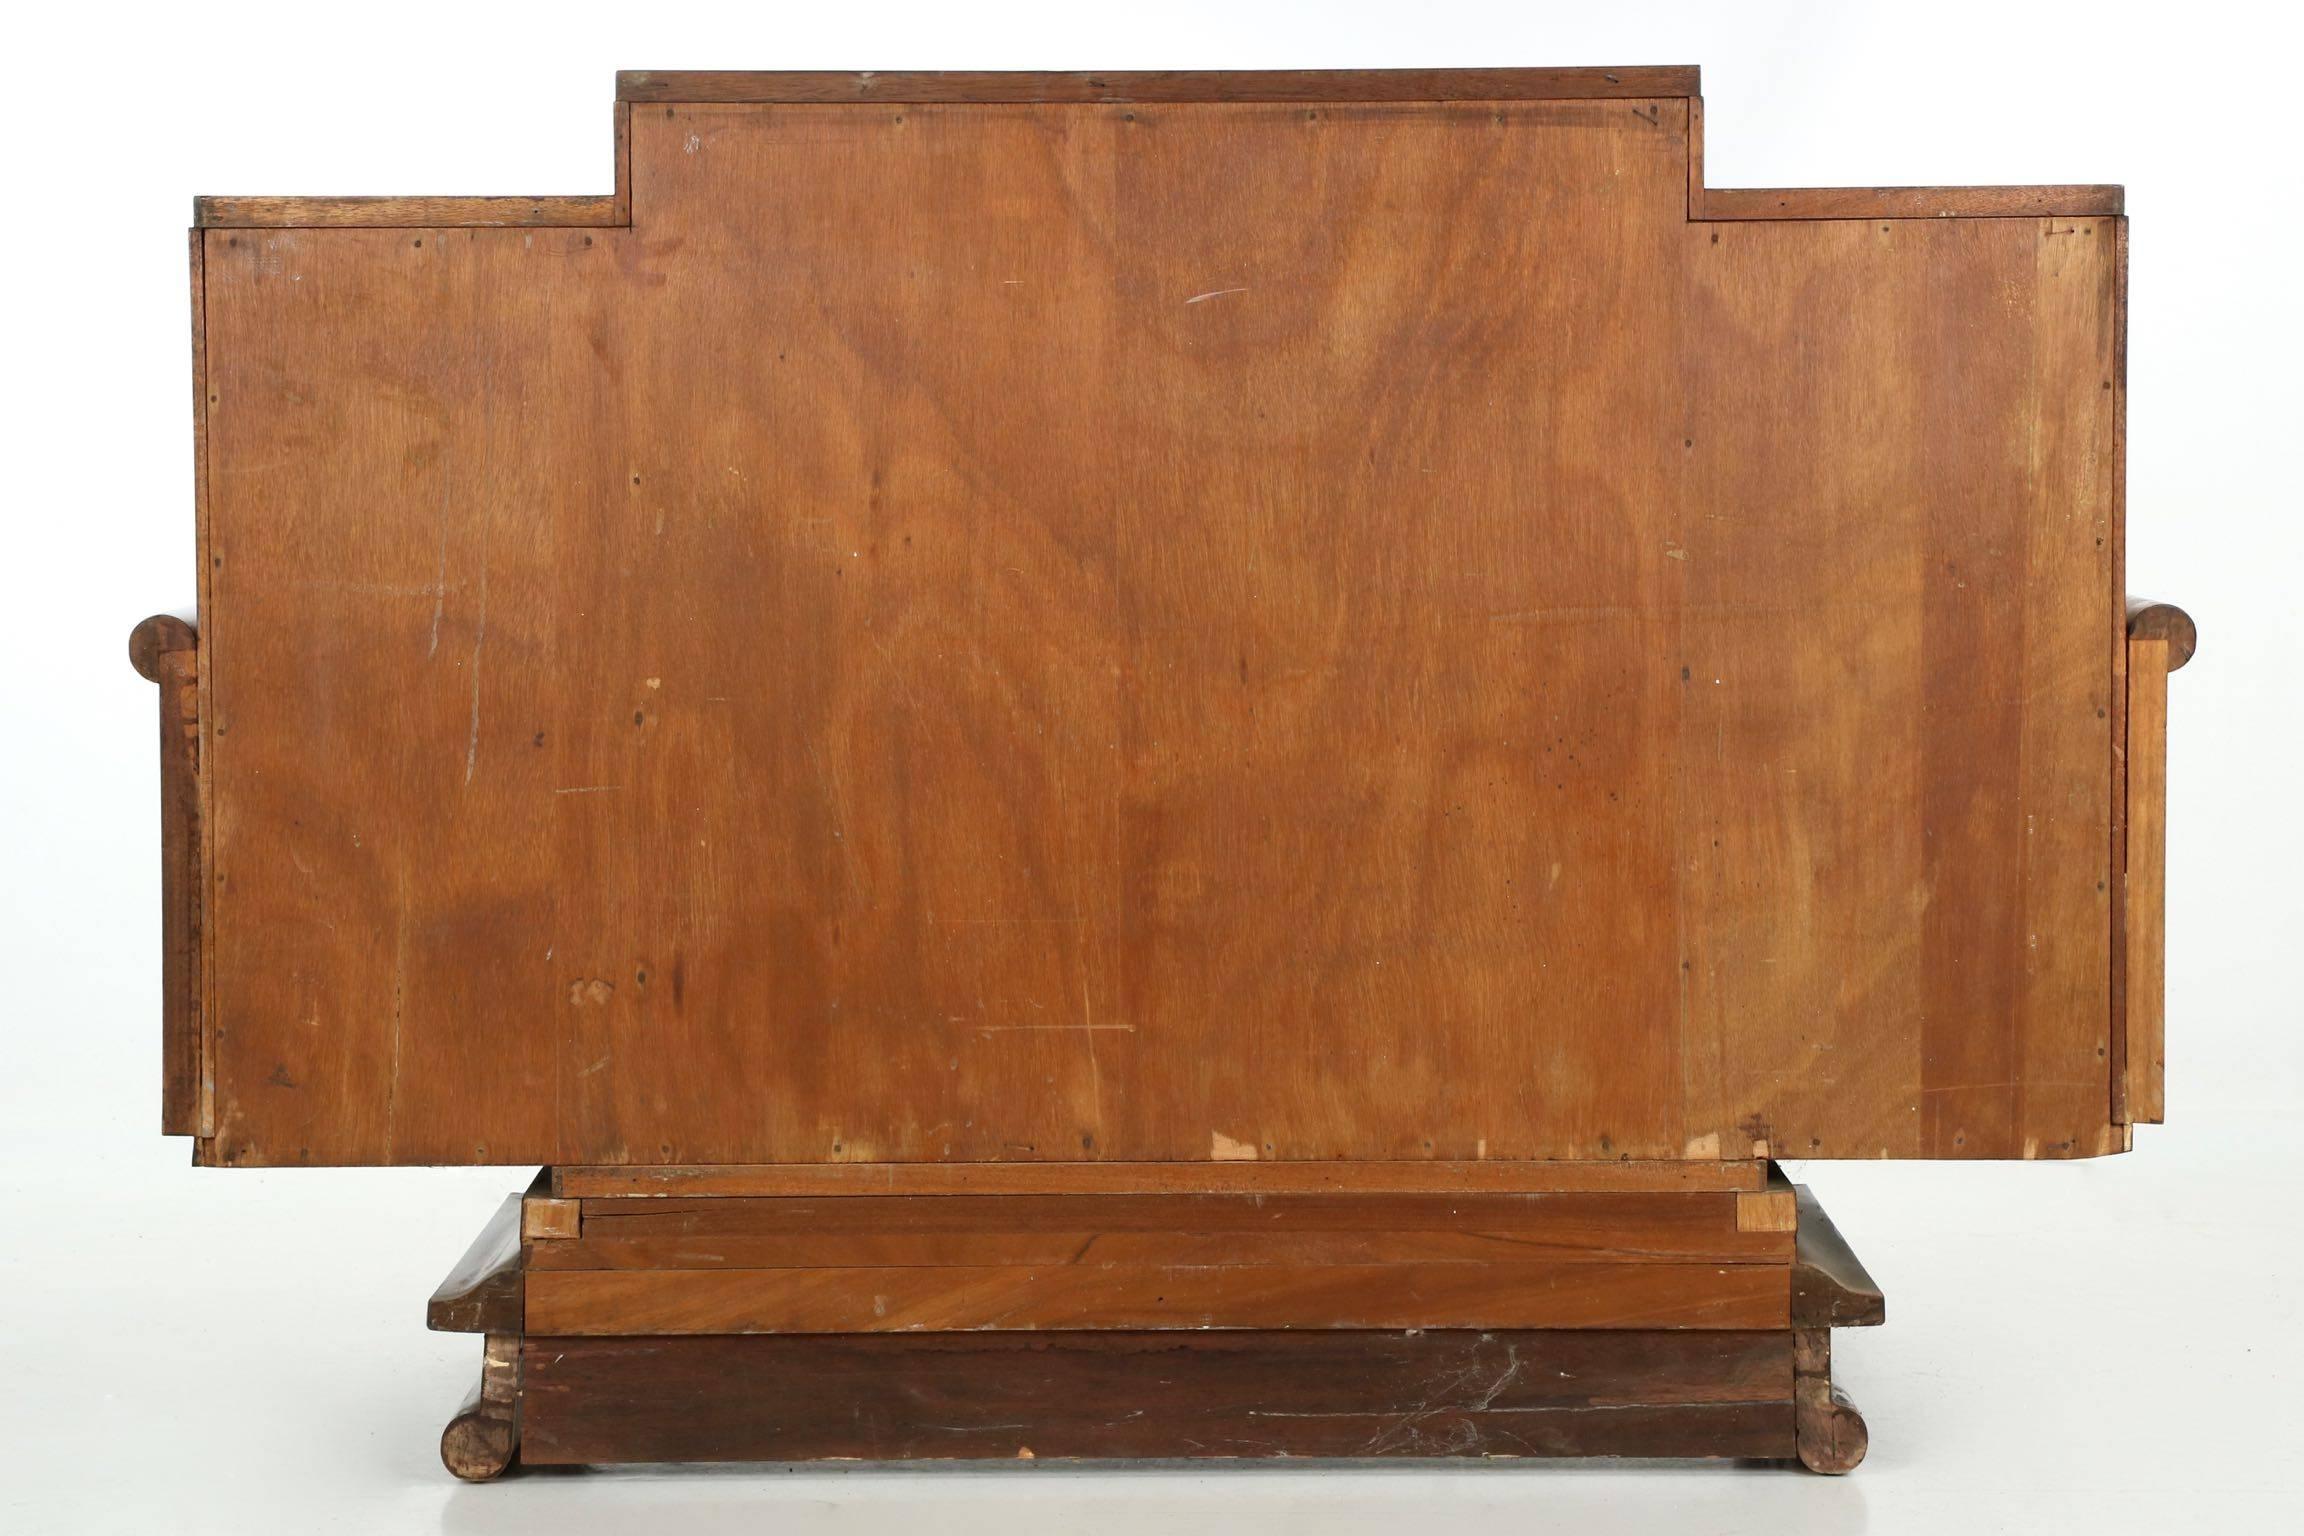 Gilt Art Deco Amboyna Veneered Stepped Console Cabinet with Drawers, circa 1930